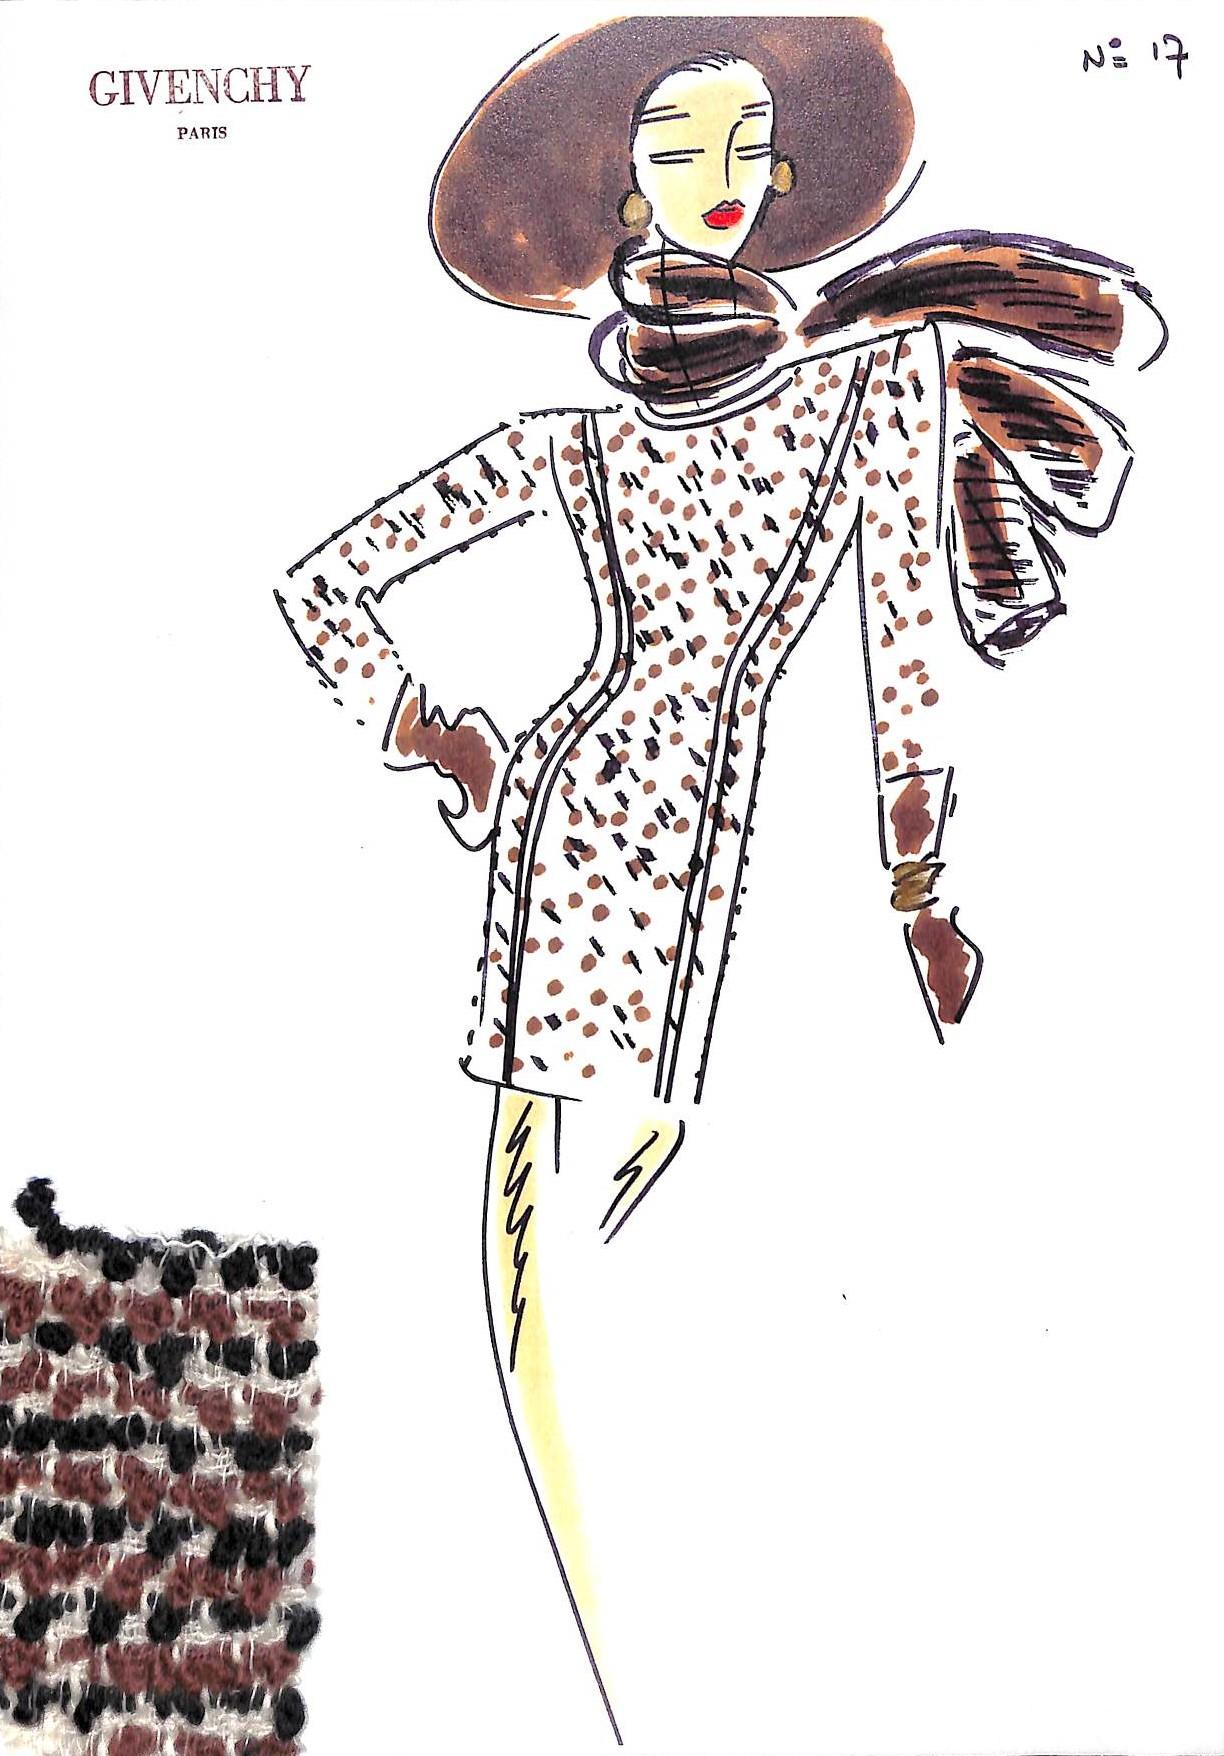 "Givenchy Paris No 17 Fashion Illustration w/ Couture Swatch" - Art by Givenchy (atelier)